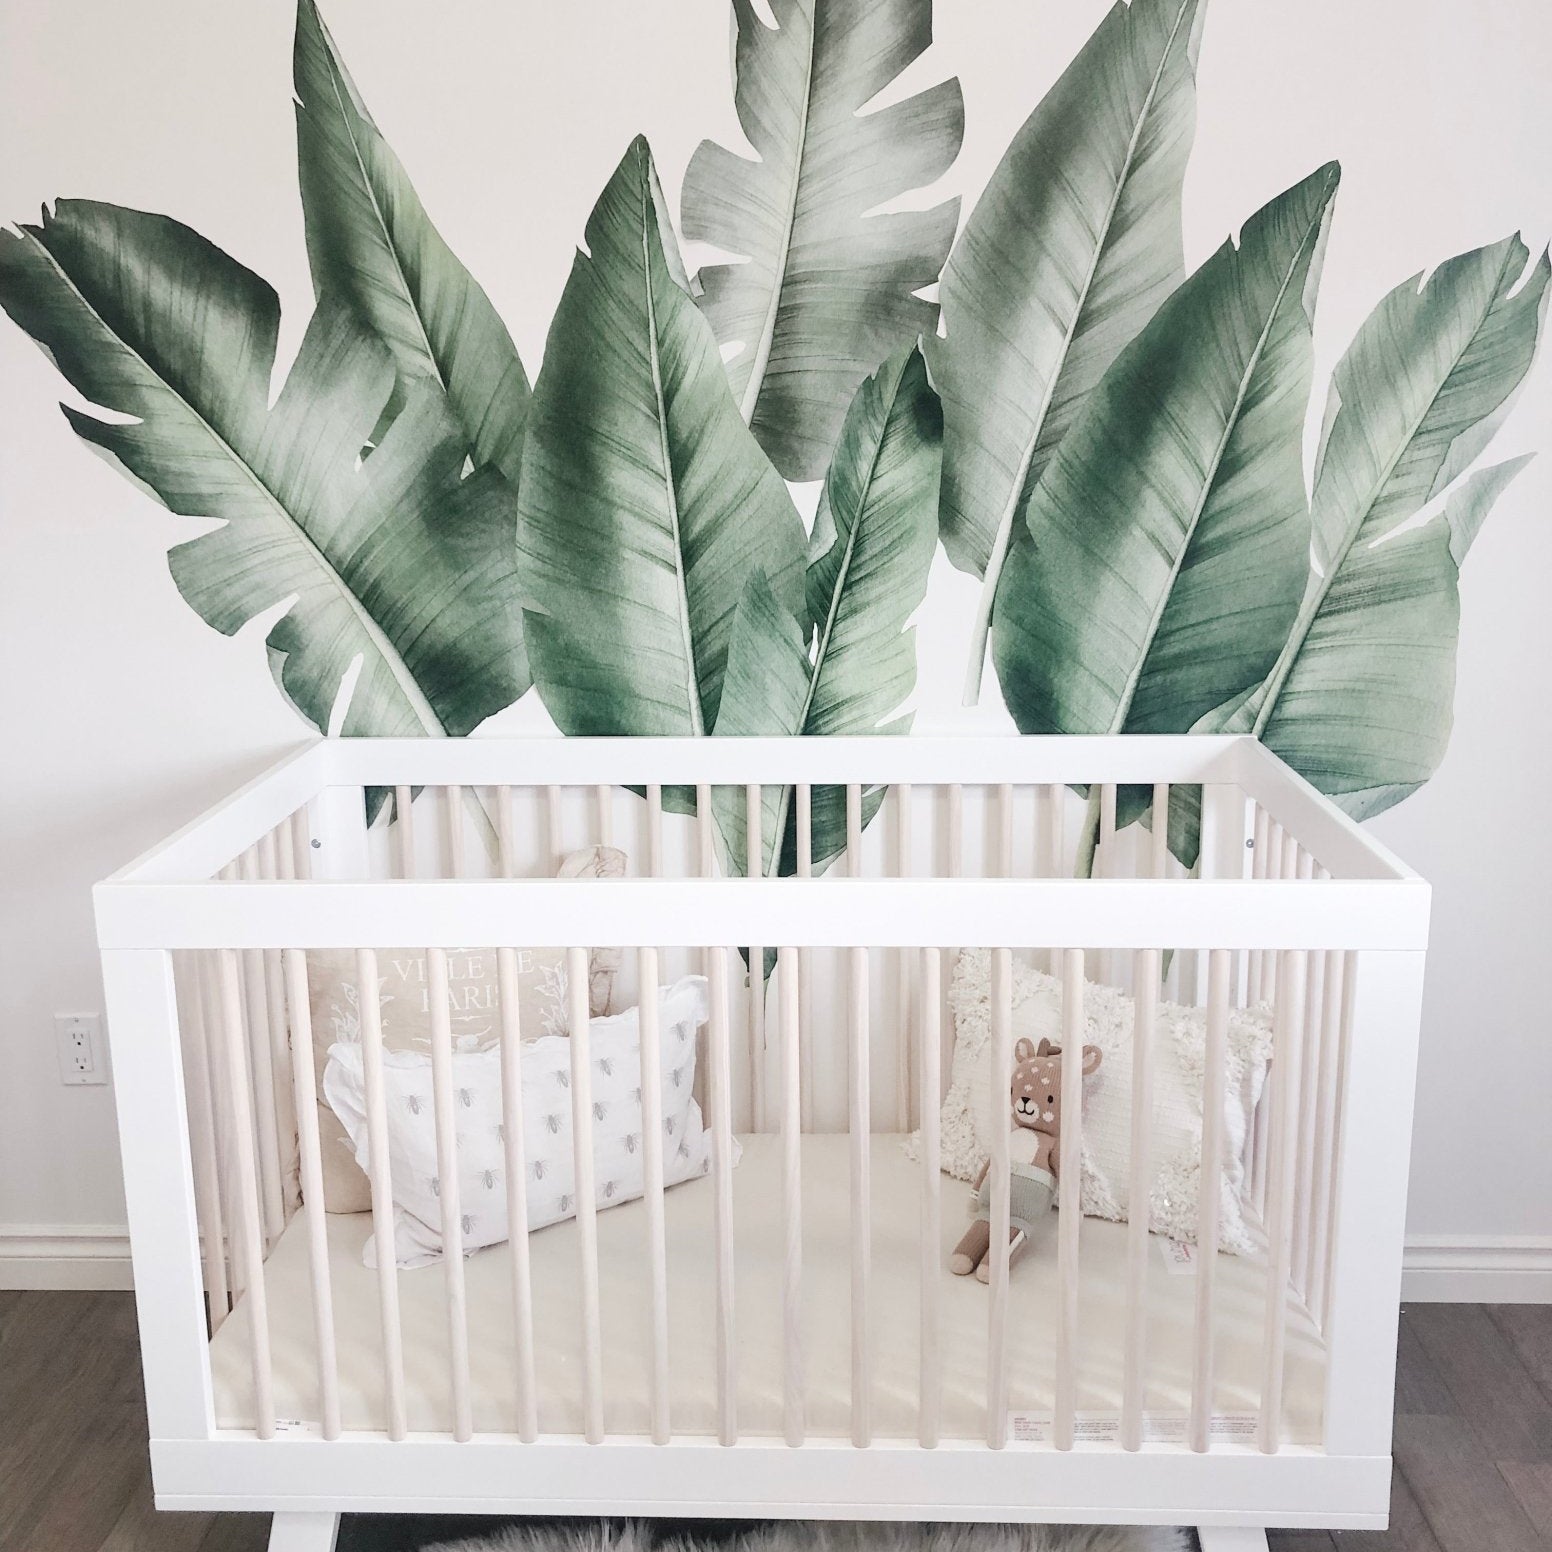 Safari Nursery Decor with giant green tropical leaf wall decals in baby nursery with white crib